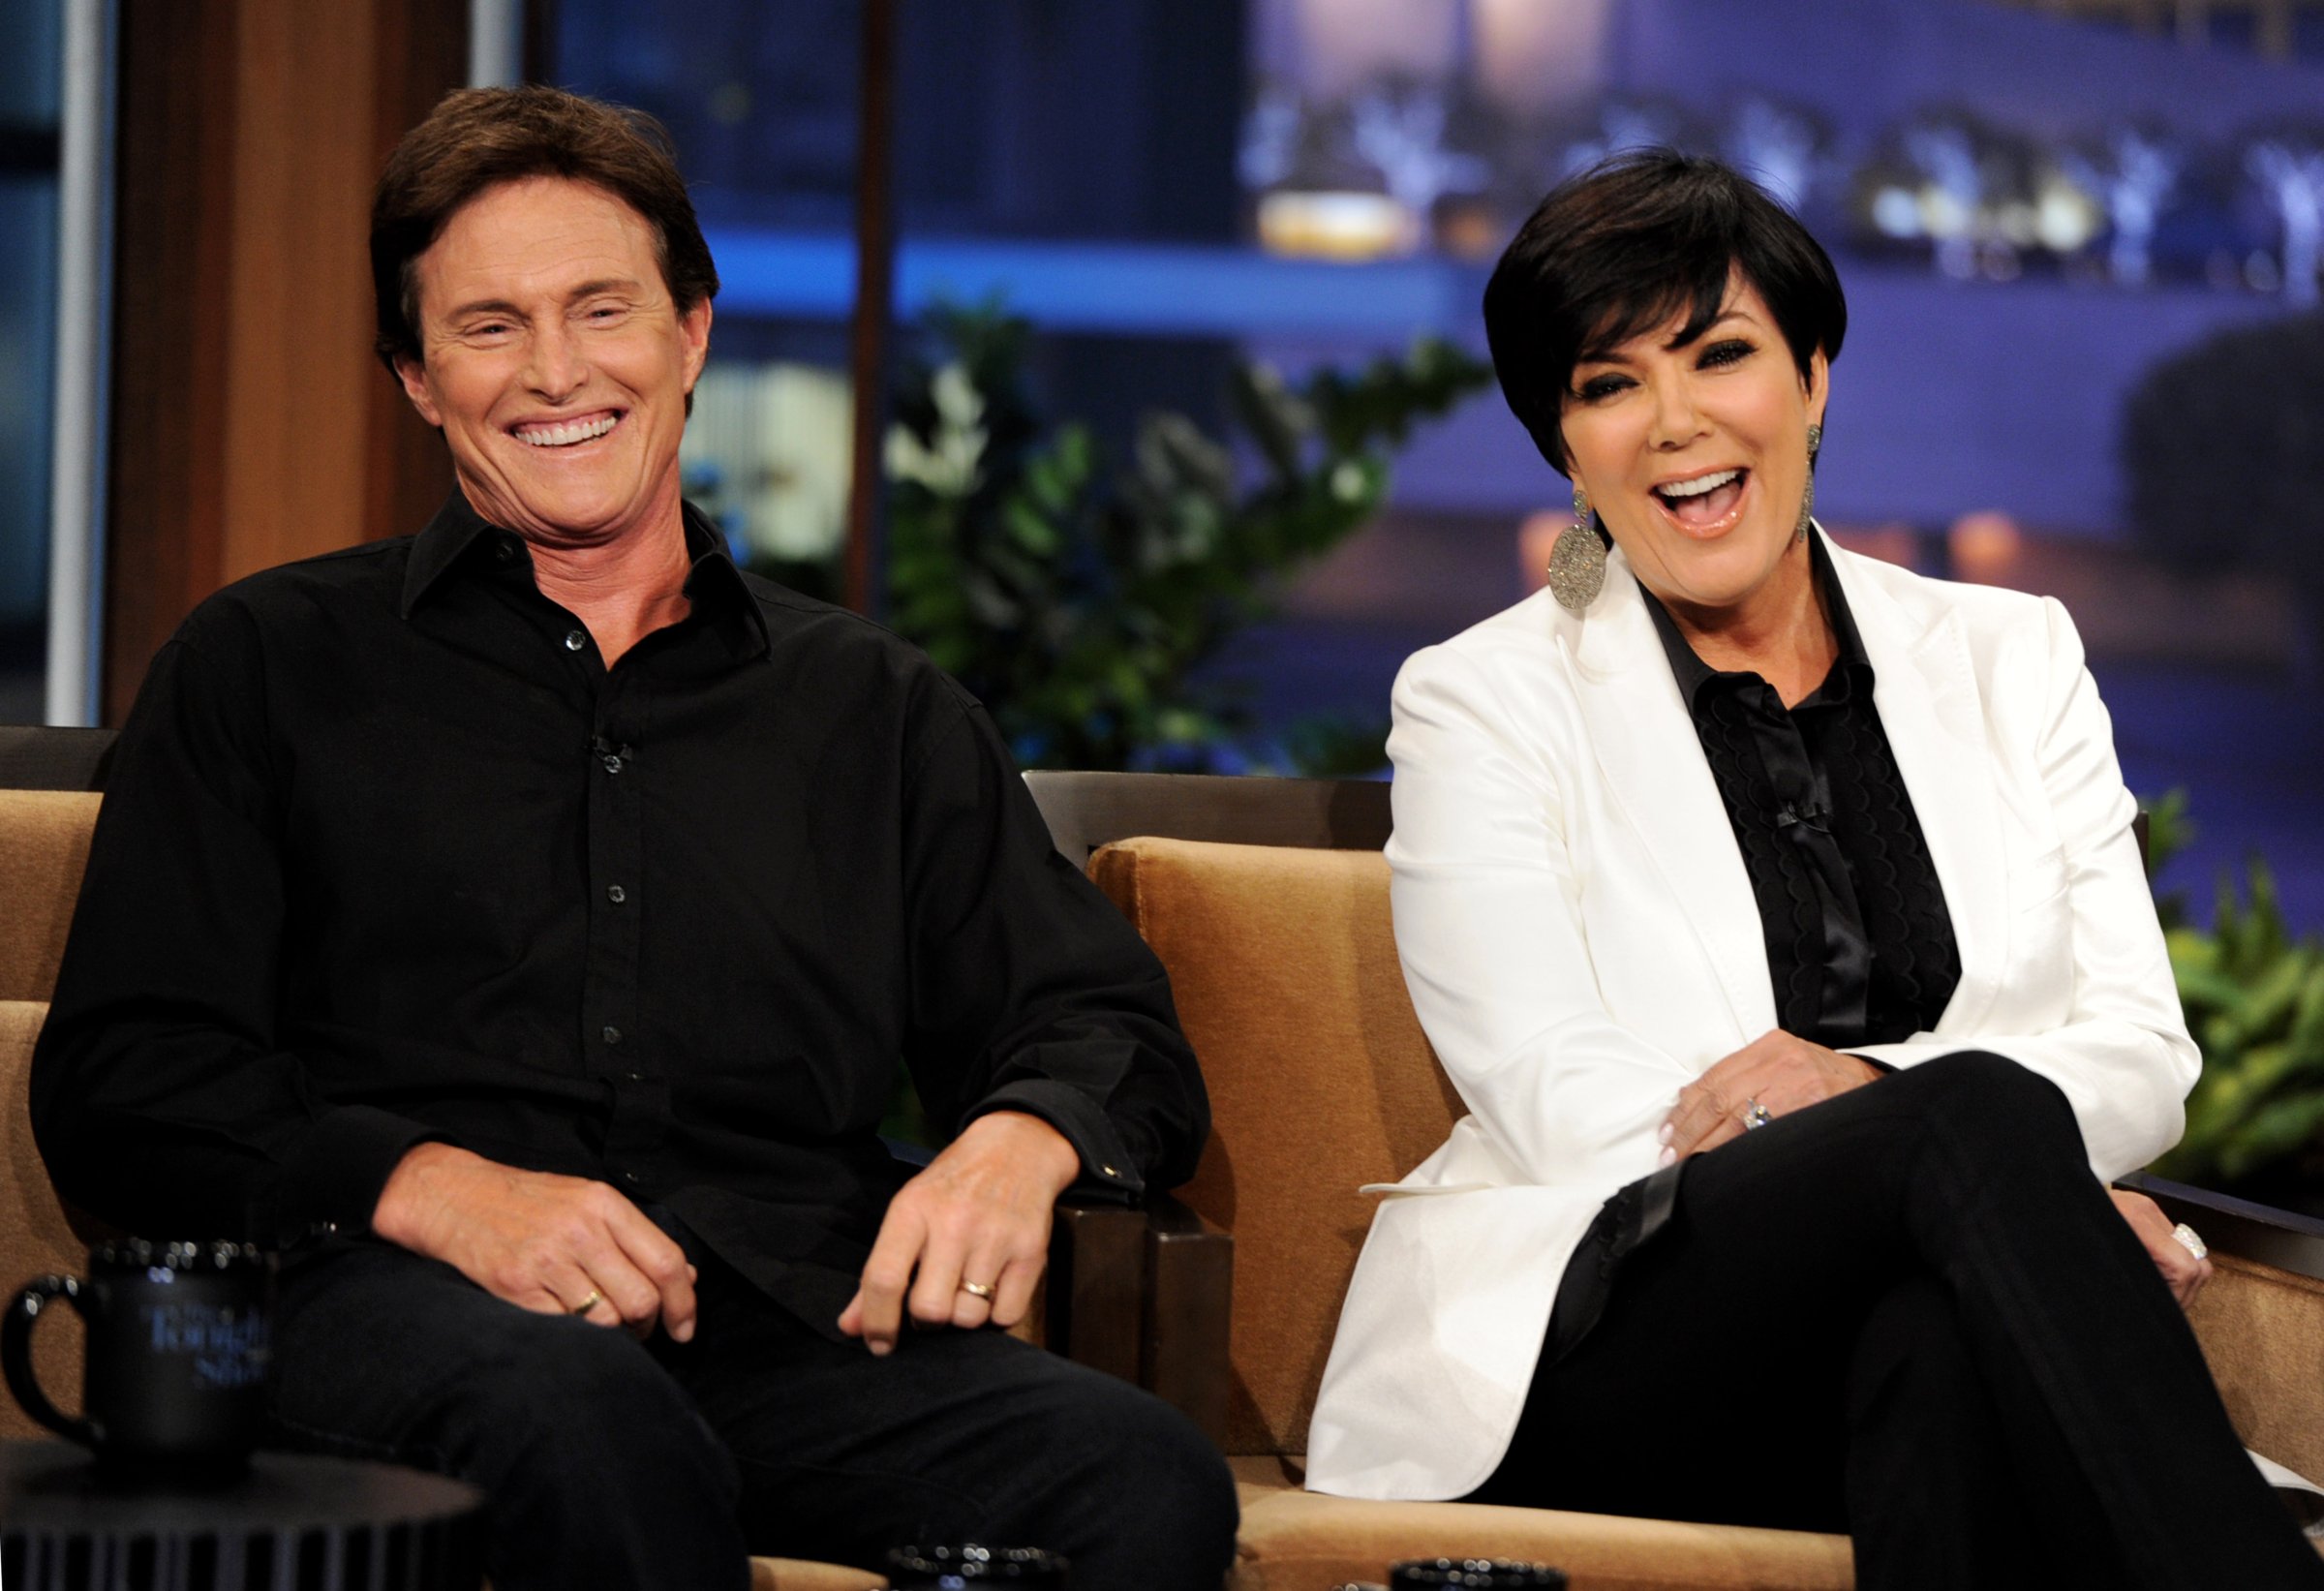 Television personalities Bruce Jenner (L) and his wife Kris Jenner appear on The Tonight Show with Jay Leno at the NBC Studios on June 10, 2011 in Burbank, Calif.